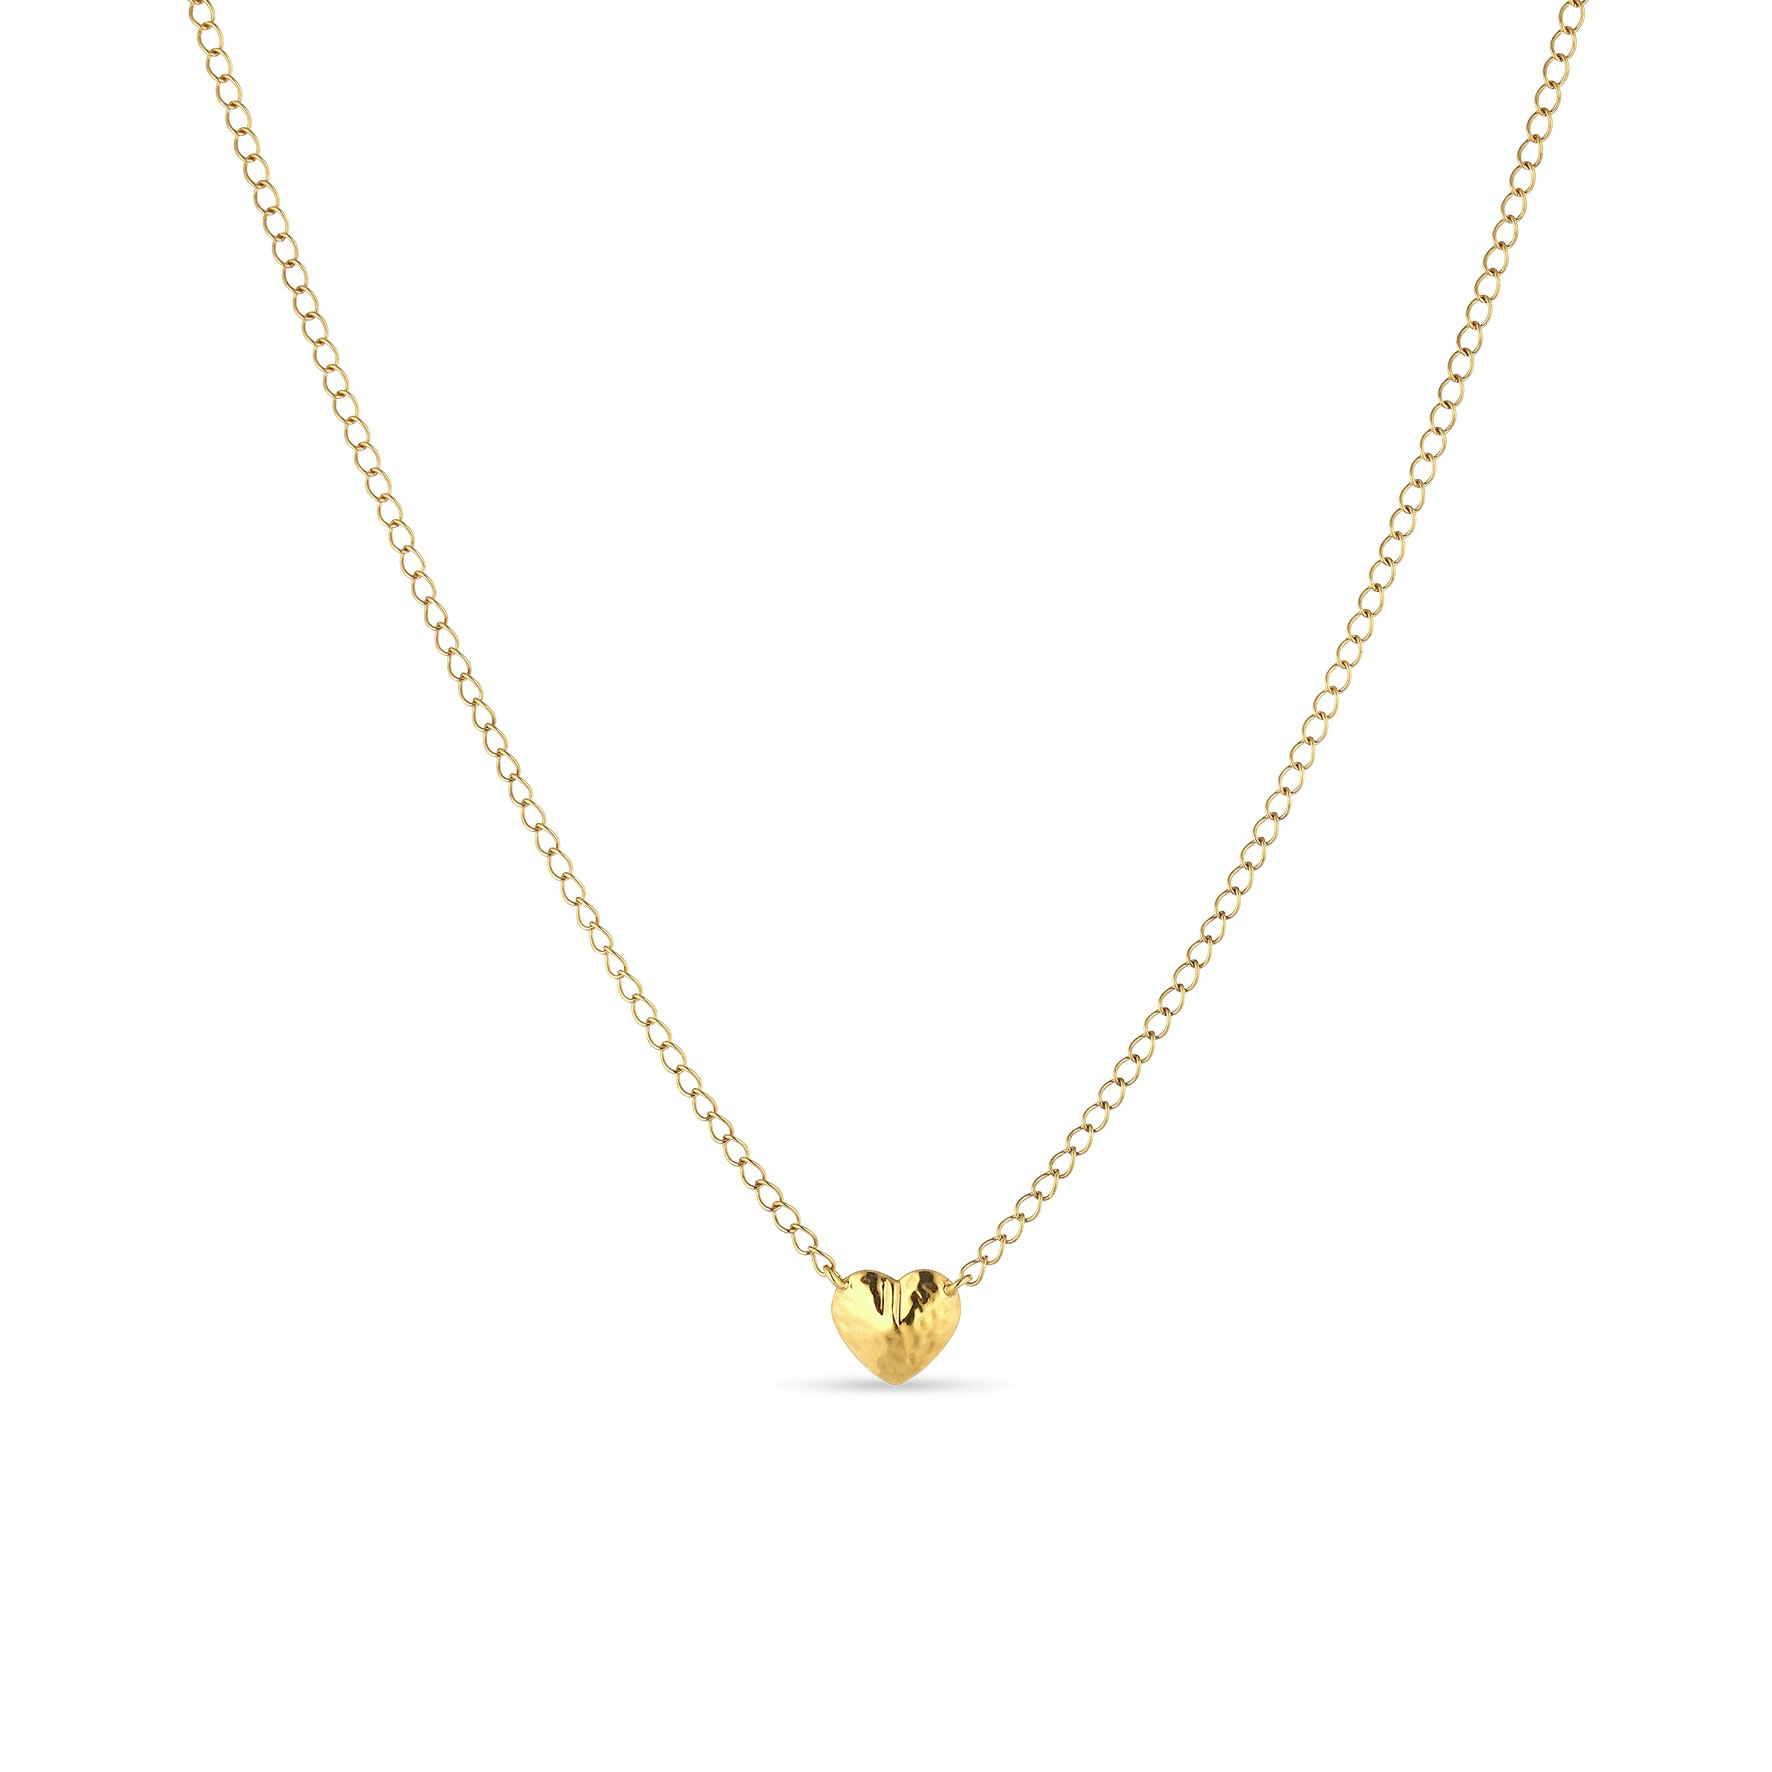 Bruised Heart Necklace from Jane Kønig in Goldplated Silver Sterling 925